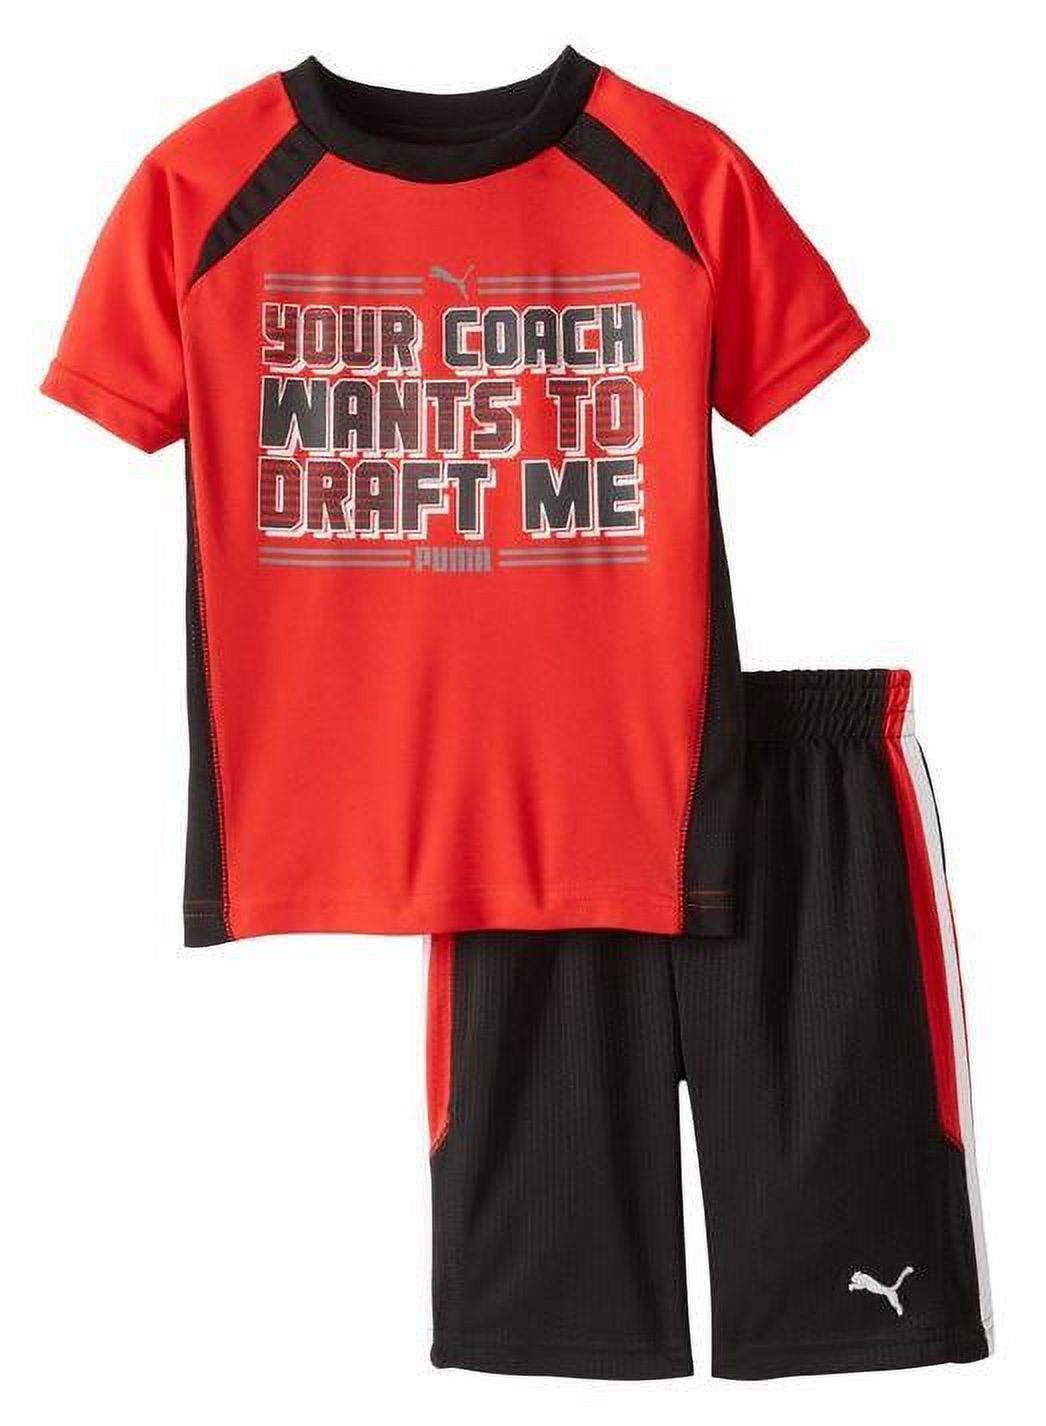 Puma Toddlers Coach Set Soccer Jersey Shirt & Shorts Set - Red - image 2 of 5